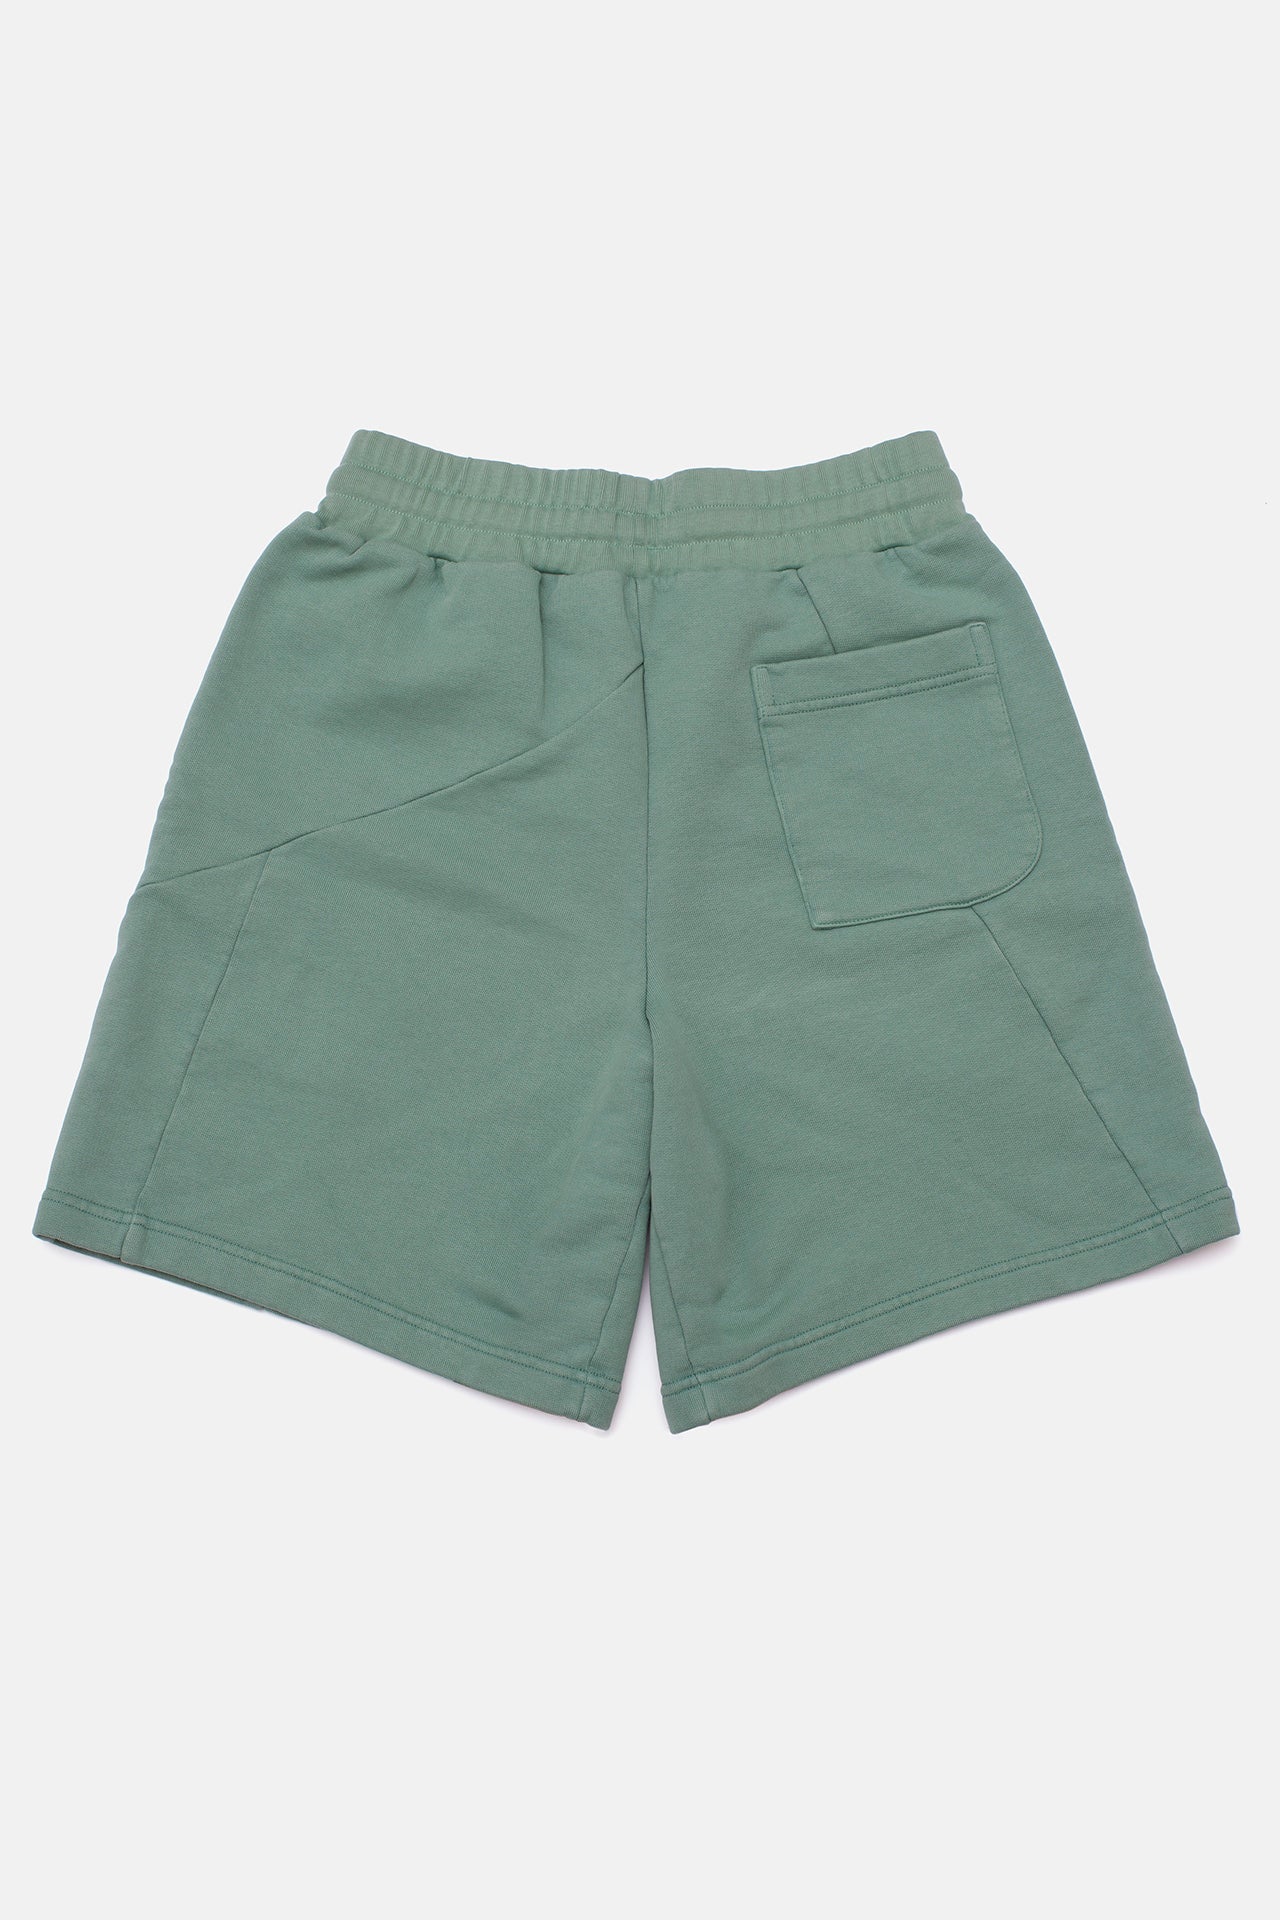 RSF x DC Deconstructed Terry Shorts Mint - Retrosuperfuture USA -